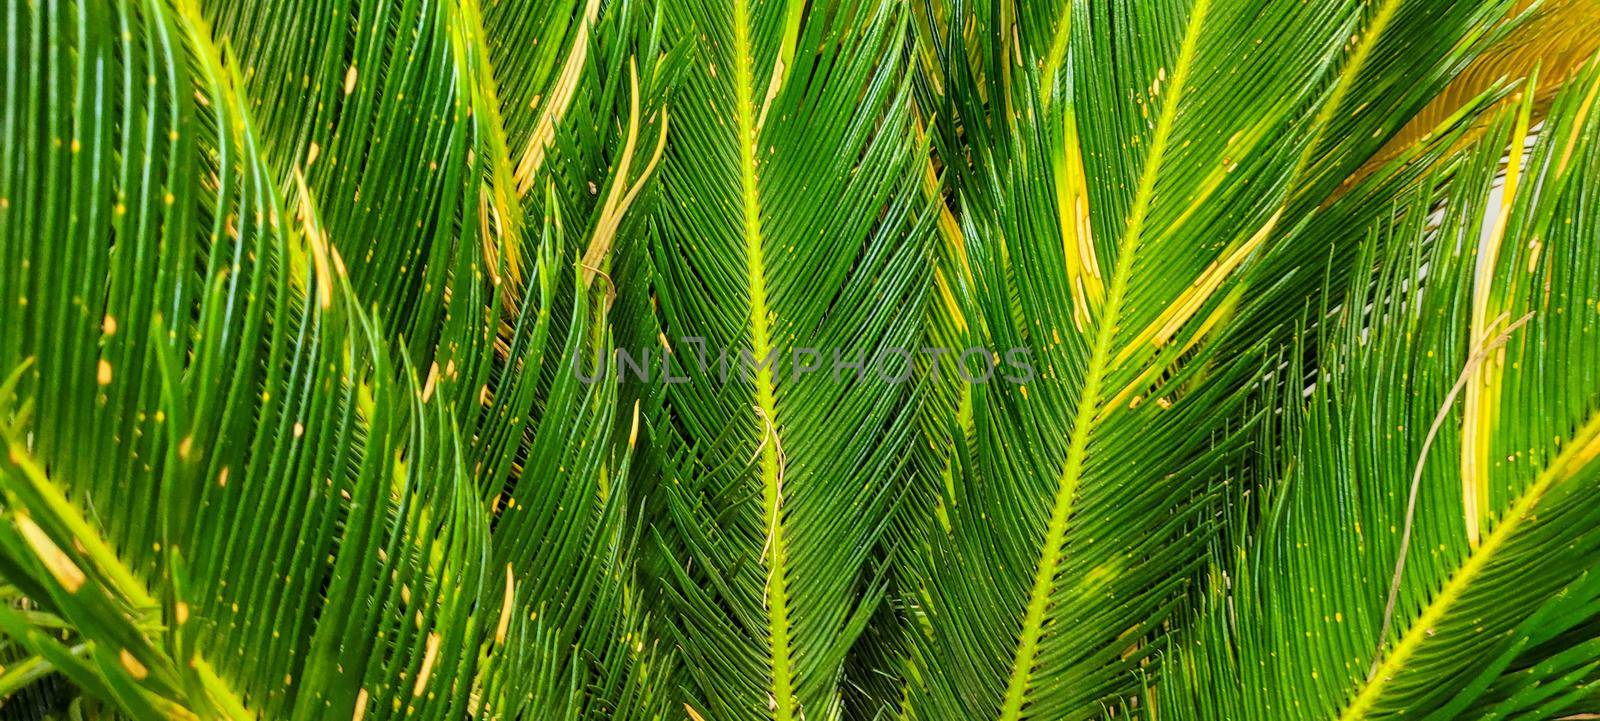 green lawn image that can be used as a natural background by sarsa